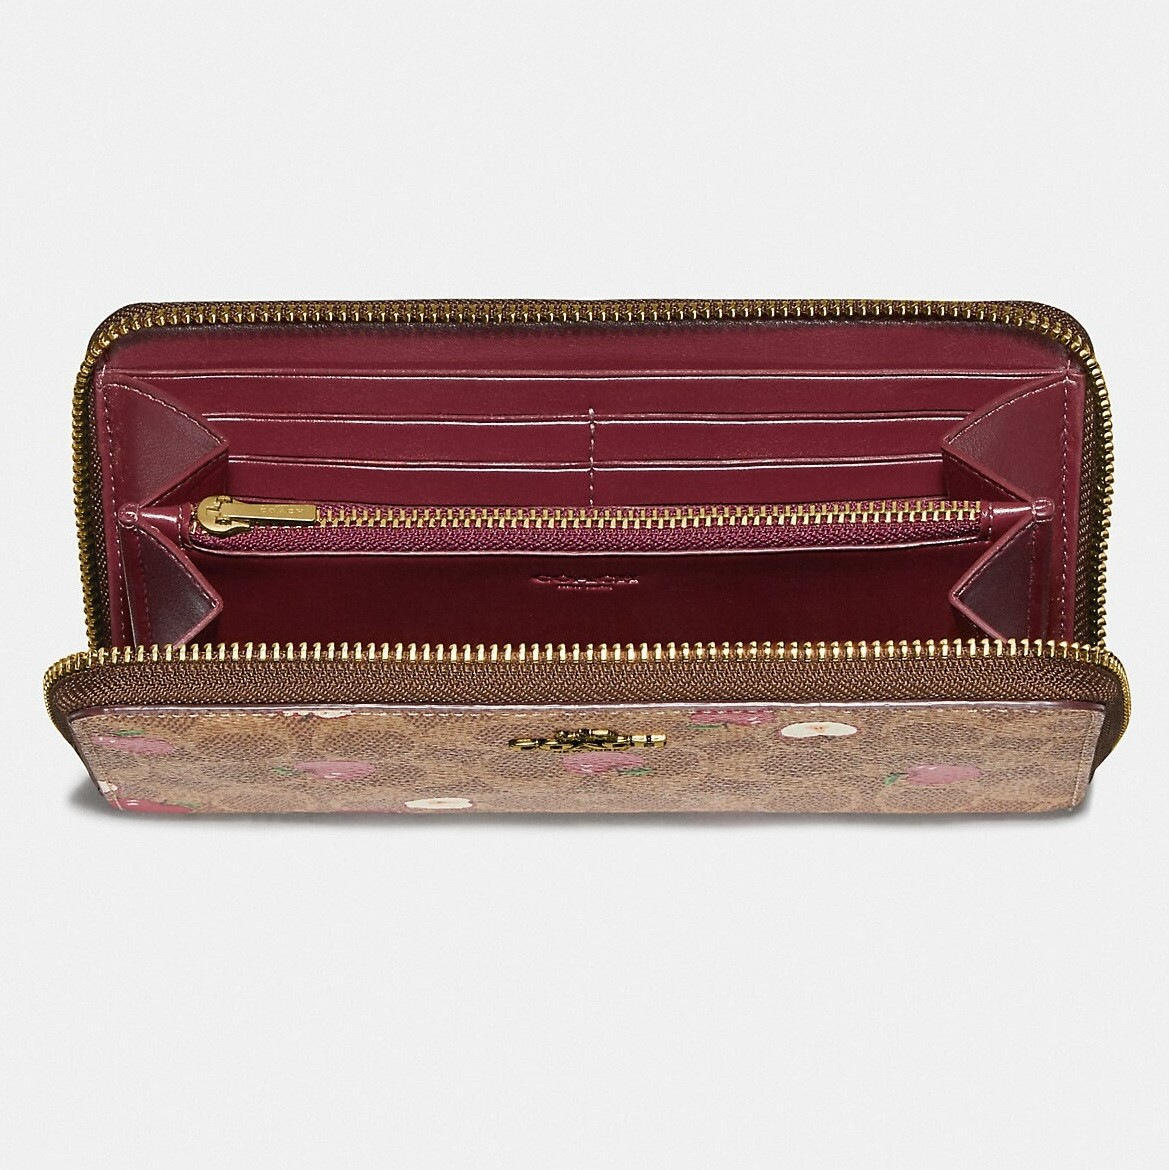 VÍ NỮ DÀI COACH TRÁI TÁO ACCORDION ZIP WALLET IN SIGNATURE CANVAS WITH SCATTERED APPLE PRINT 1